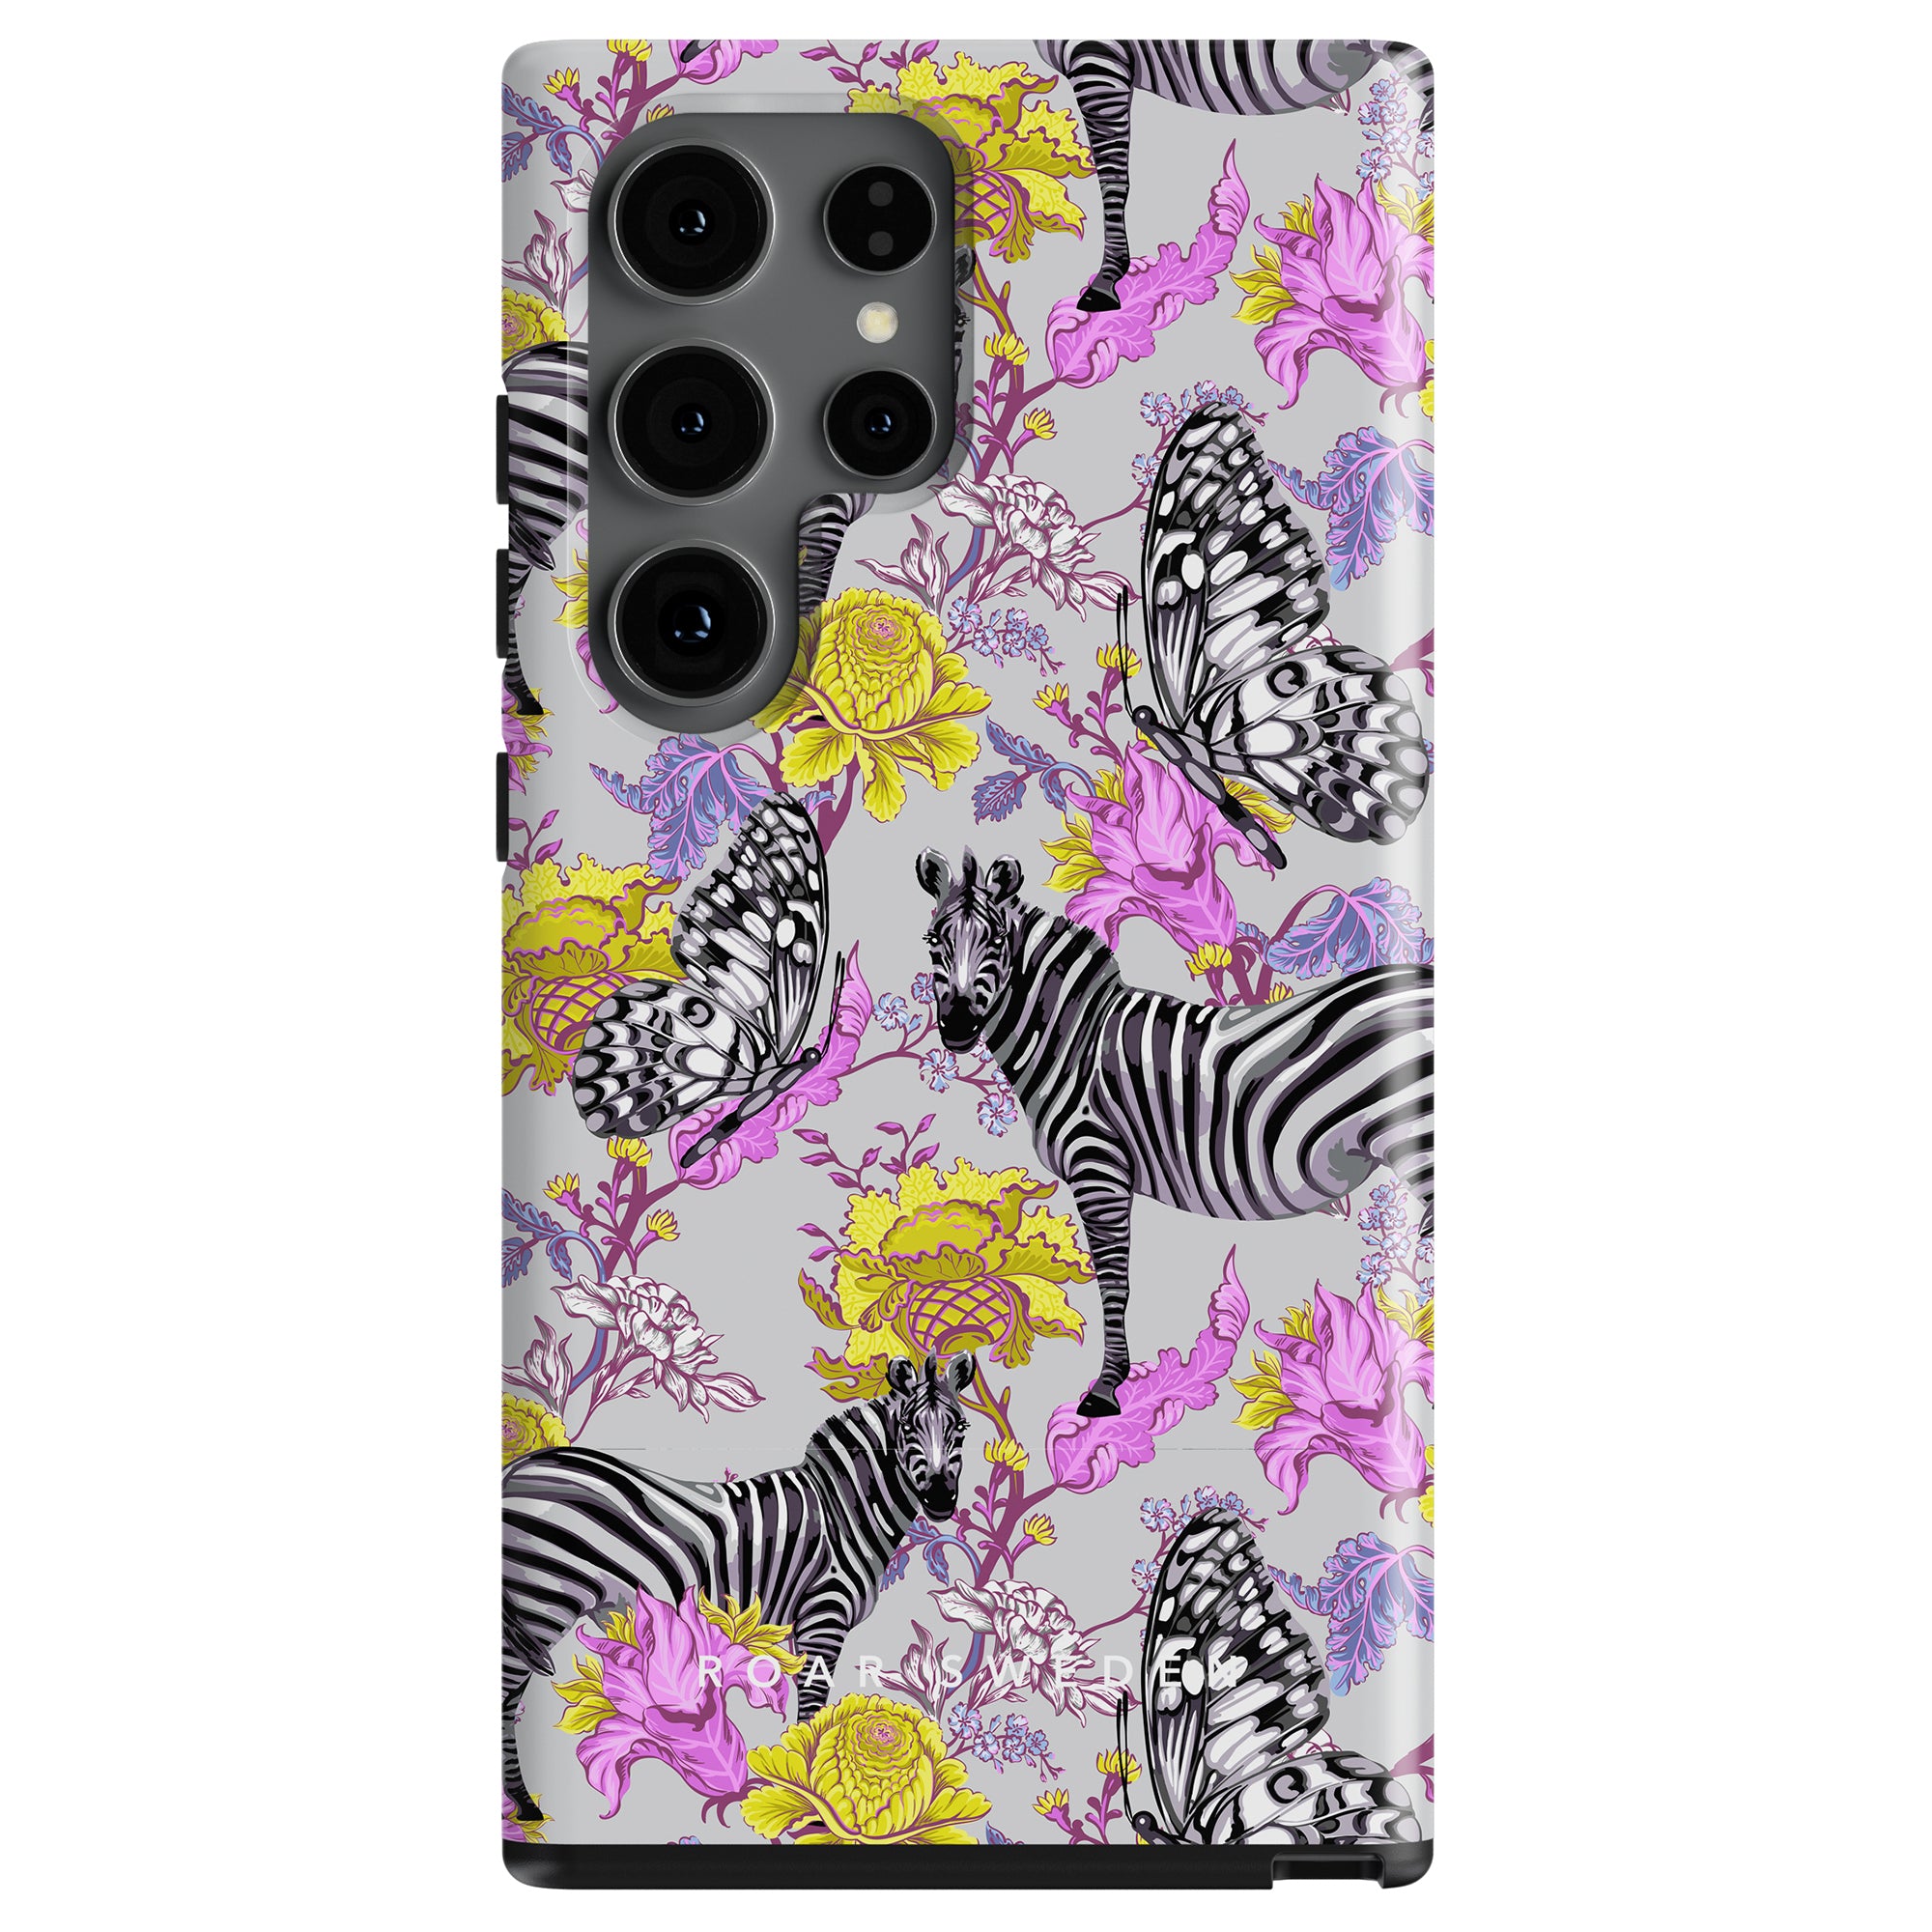 Smartphone with a floral and Exotic Zebra - Tough Case.